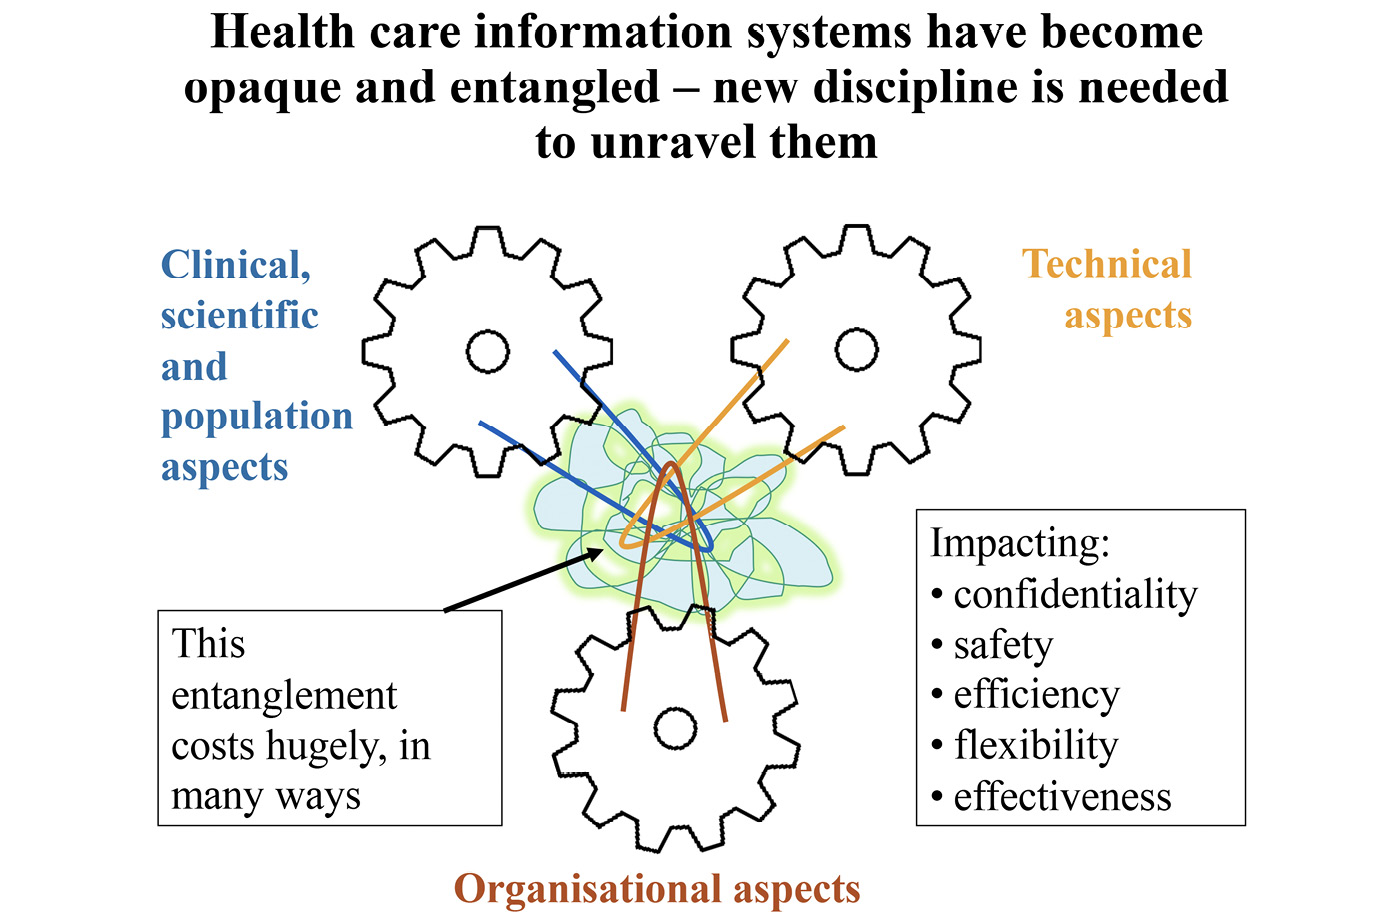 A diagram demonstrating how health care information systems have become opaque and entangled - new discipline is needed to unravel them. The diagram appears as cogs - named ‘Clinical, scientific and population aspects’ and ‘Technical aspects’ - with bands emerging from them and collecting in a tangled mess at the centre of the diagram. The diagram states ‘This entanglement costs hugely, in many ways’ along with listing examples of what it impacts ‘confidentiality, safety, efficiency, flexibility, effectiveness’.